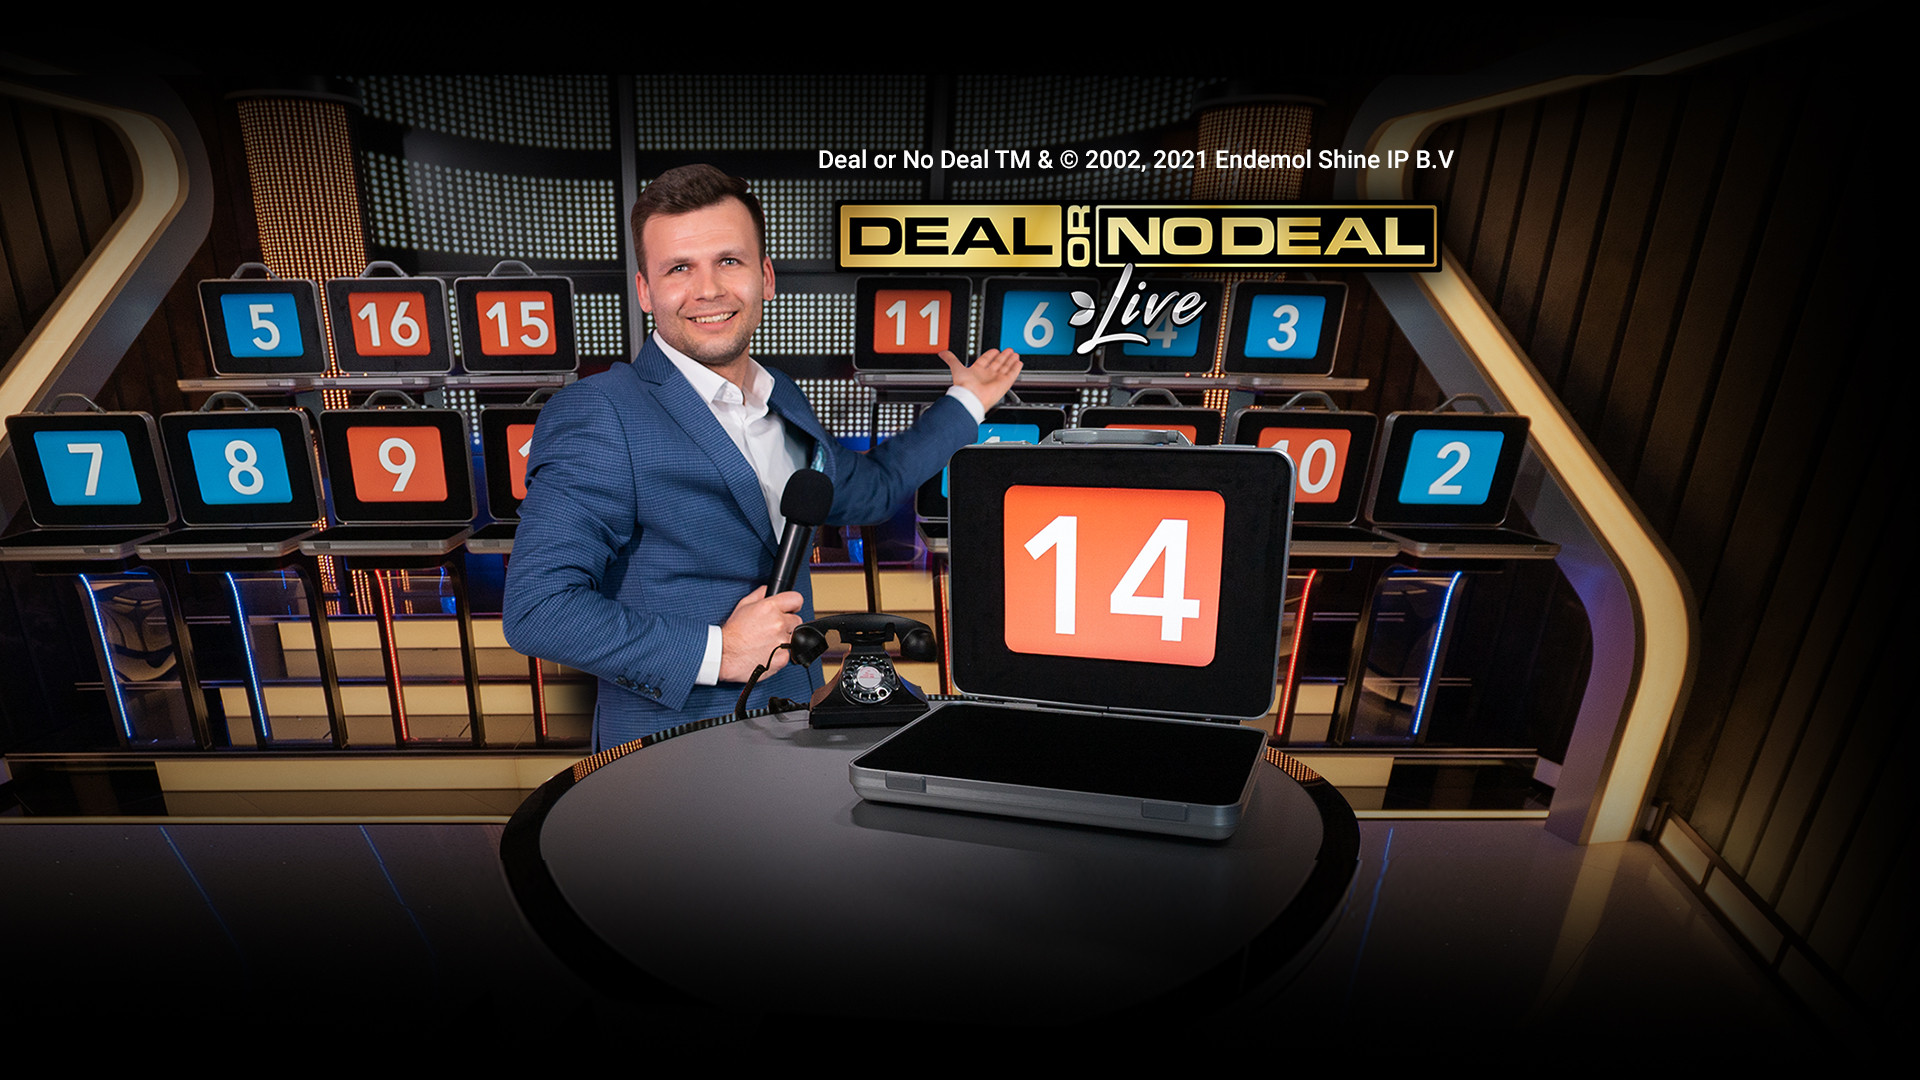 Deal or No Deal Live